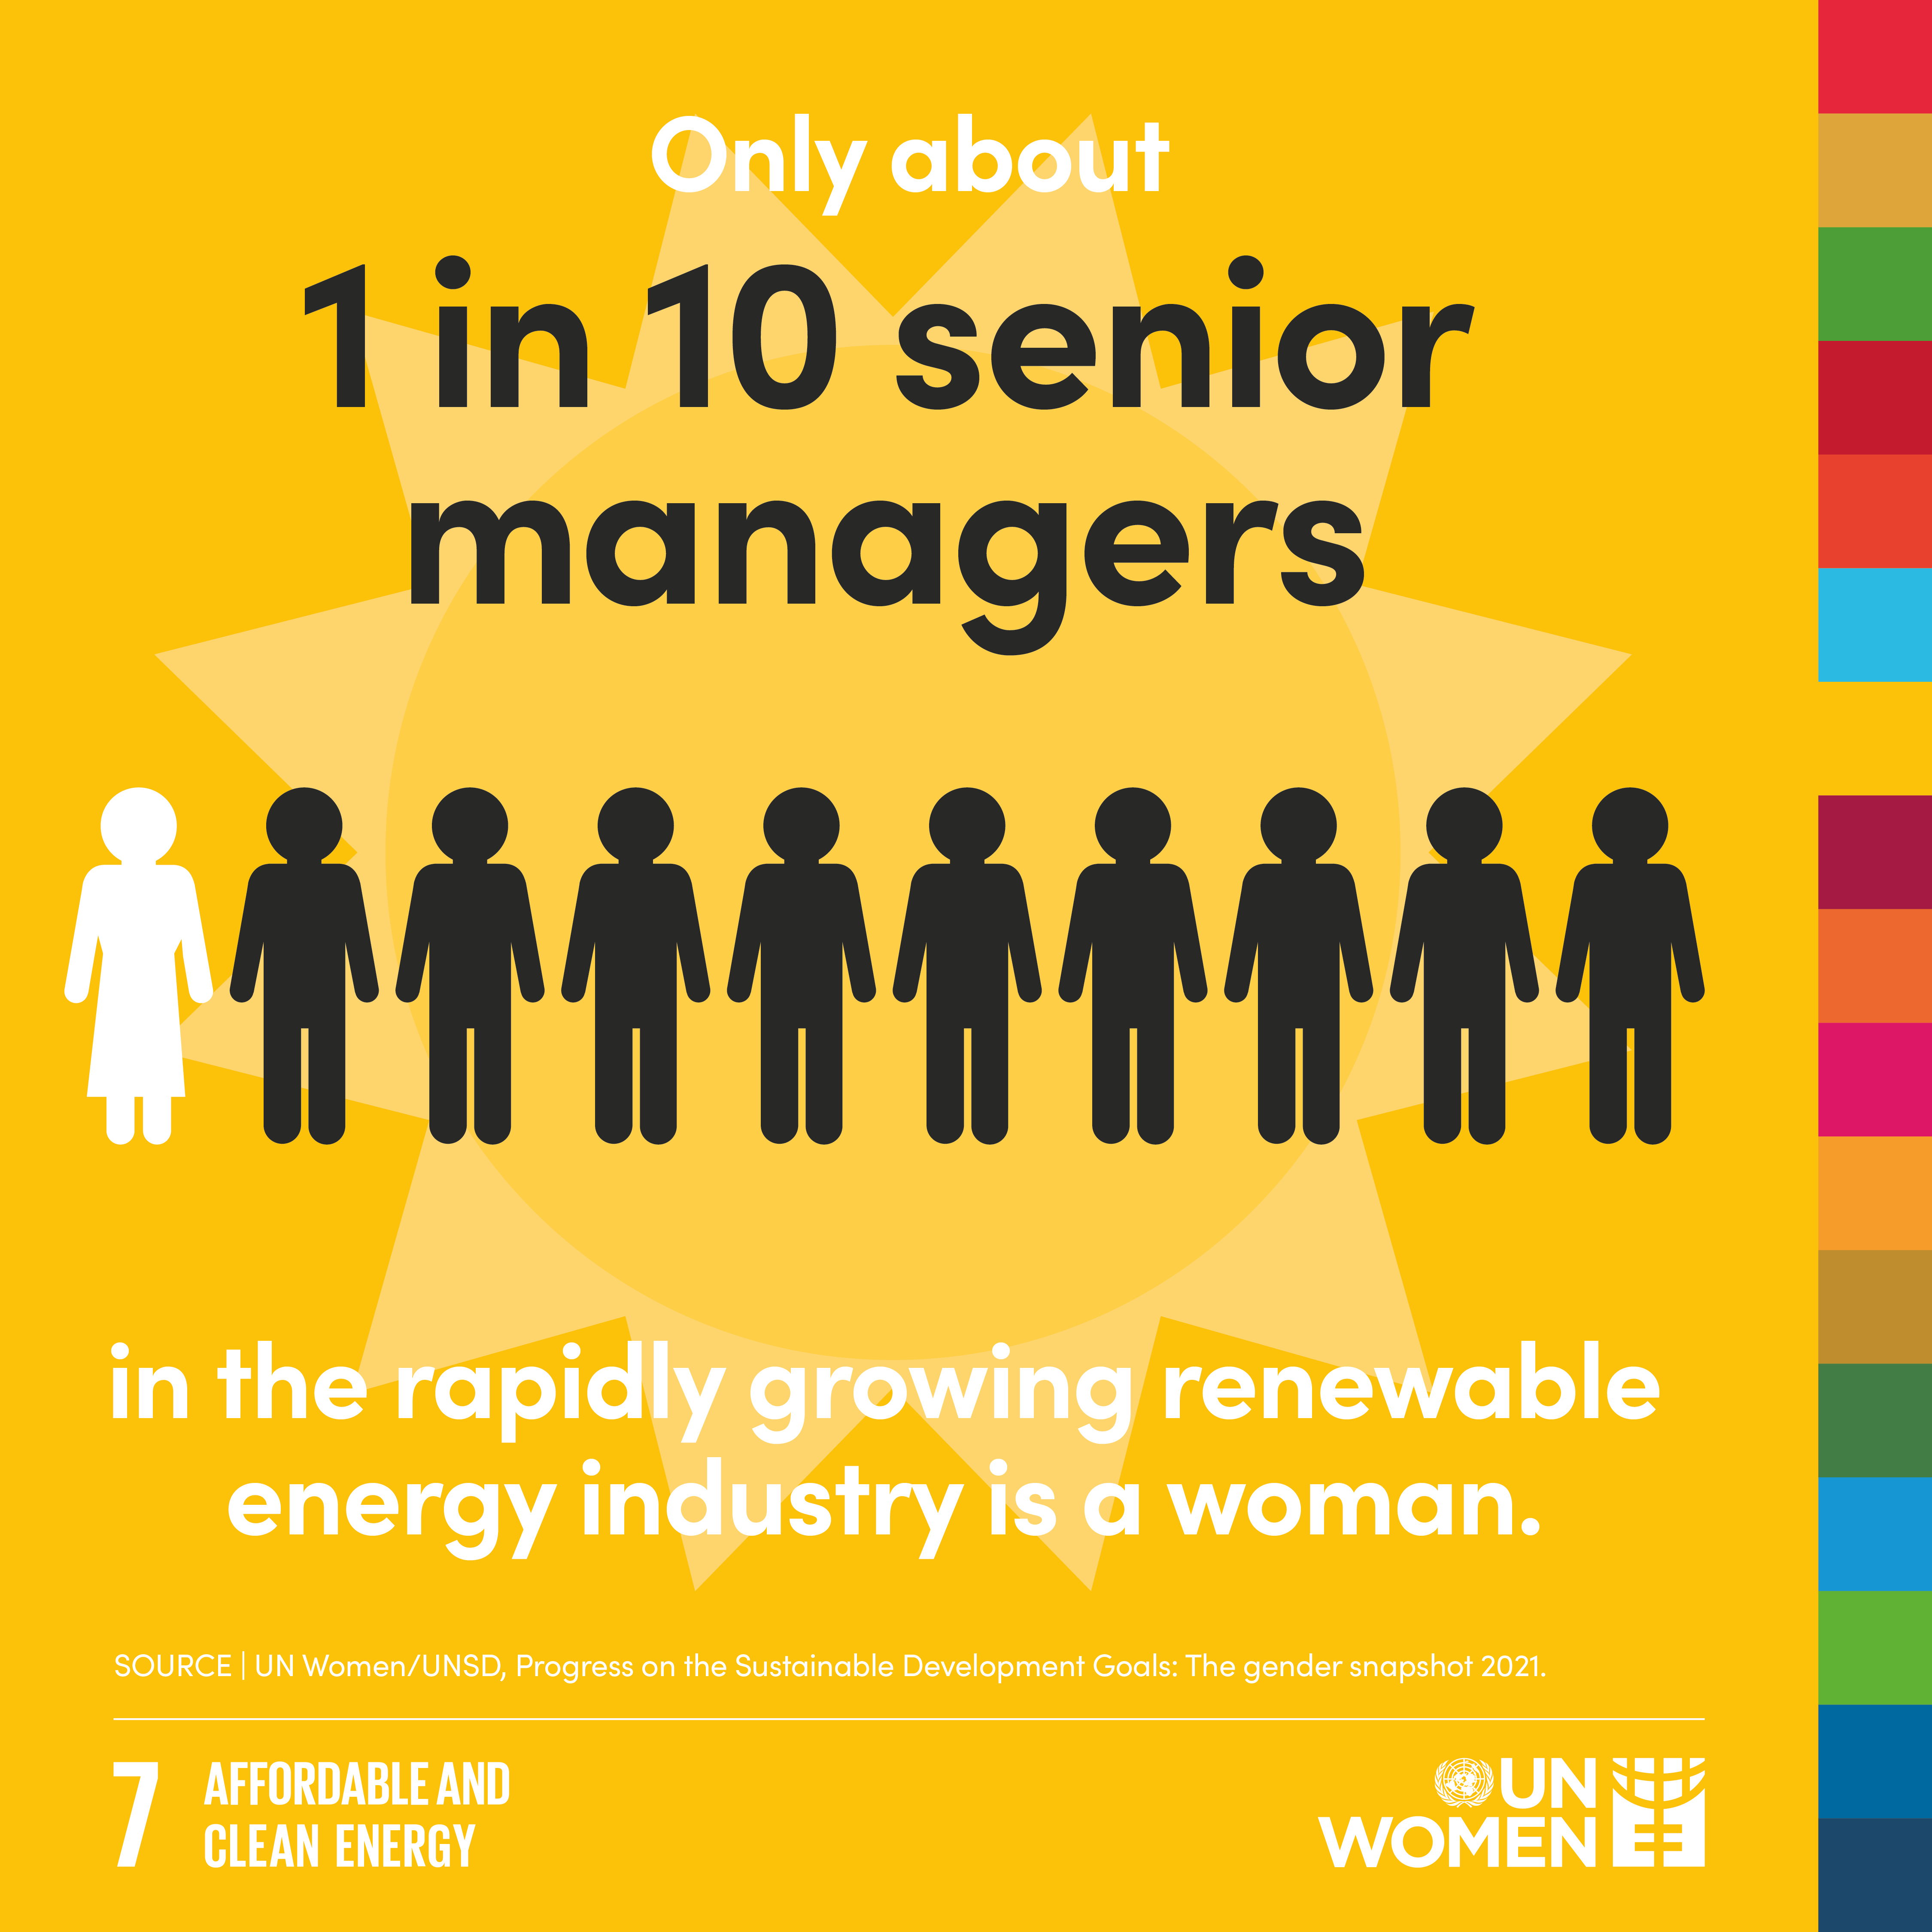 Only about 1 in 10 senior managers in the rapidly growing renewable energy industry is a woman.